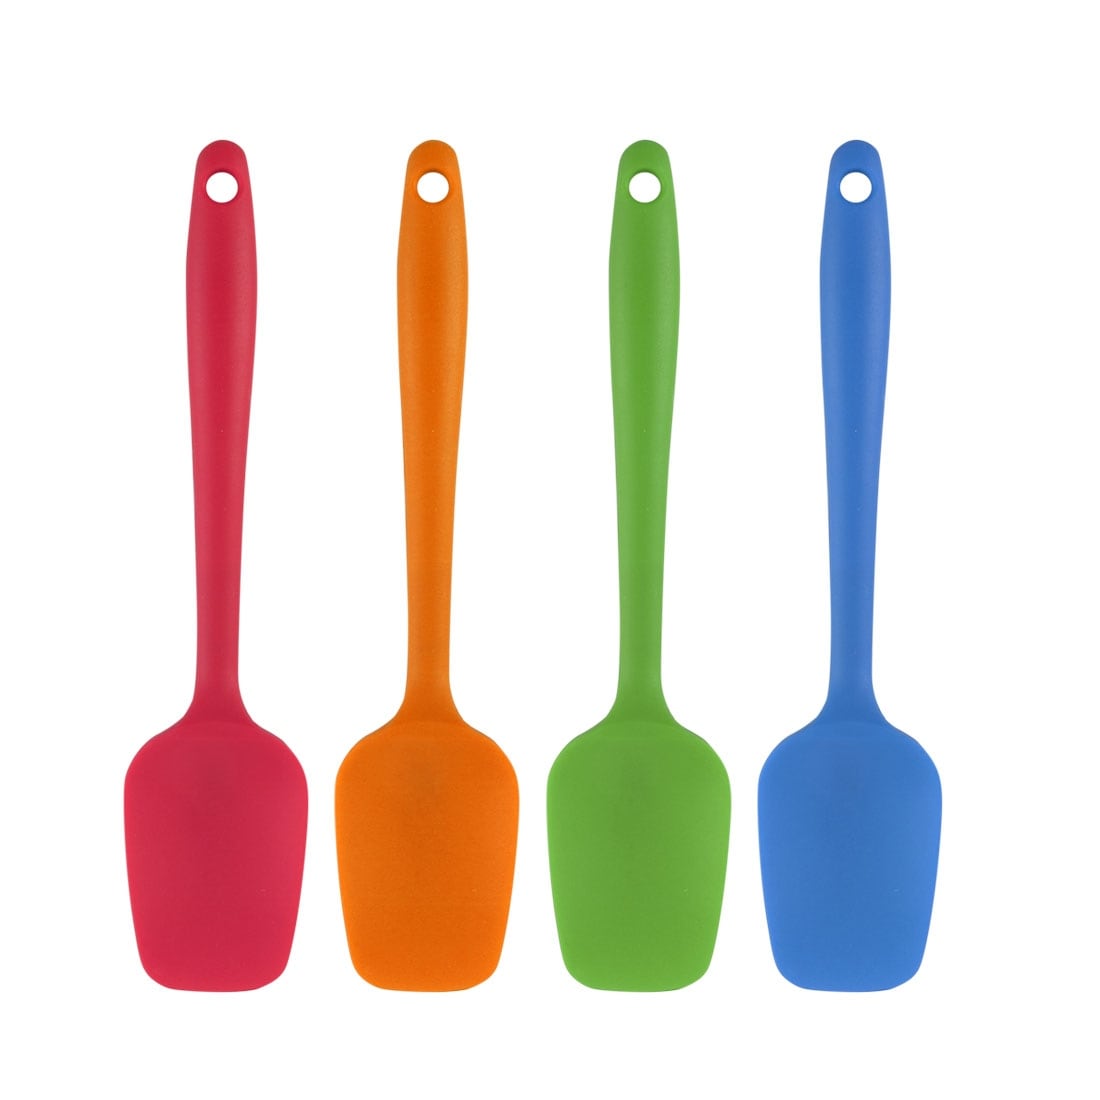 6 Pieces Silicone Mixing Spoons Set Nonstick Kitchen Cooking Spoons Silicone Serving Stirring Spoon for Kitchen Cooking Baking Utensils Red, Black Large and Small 